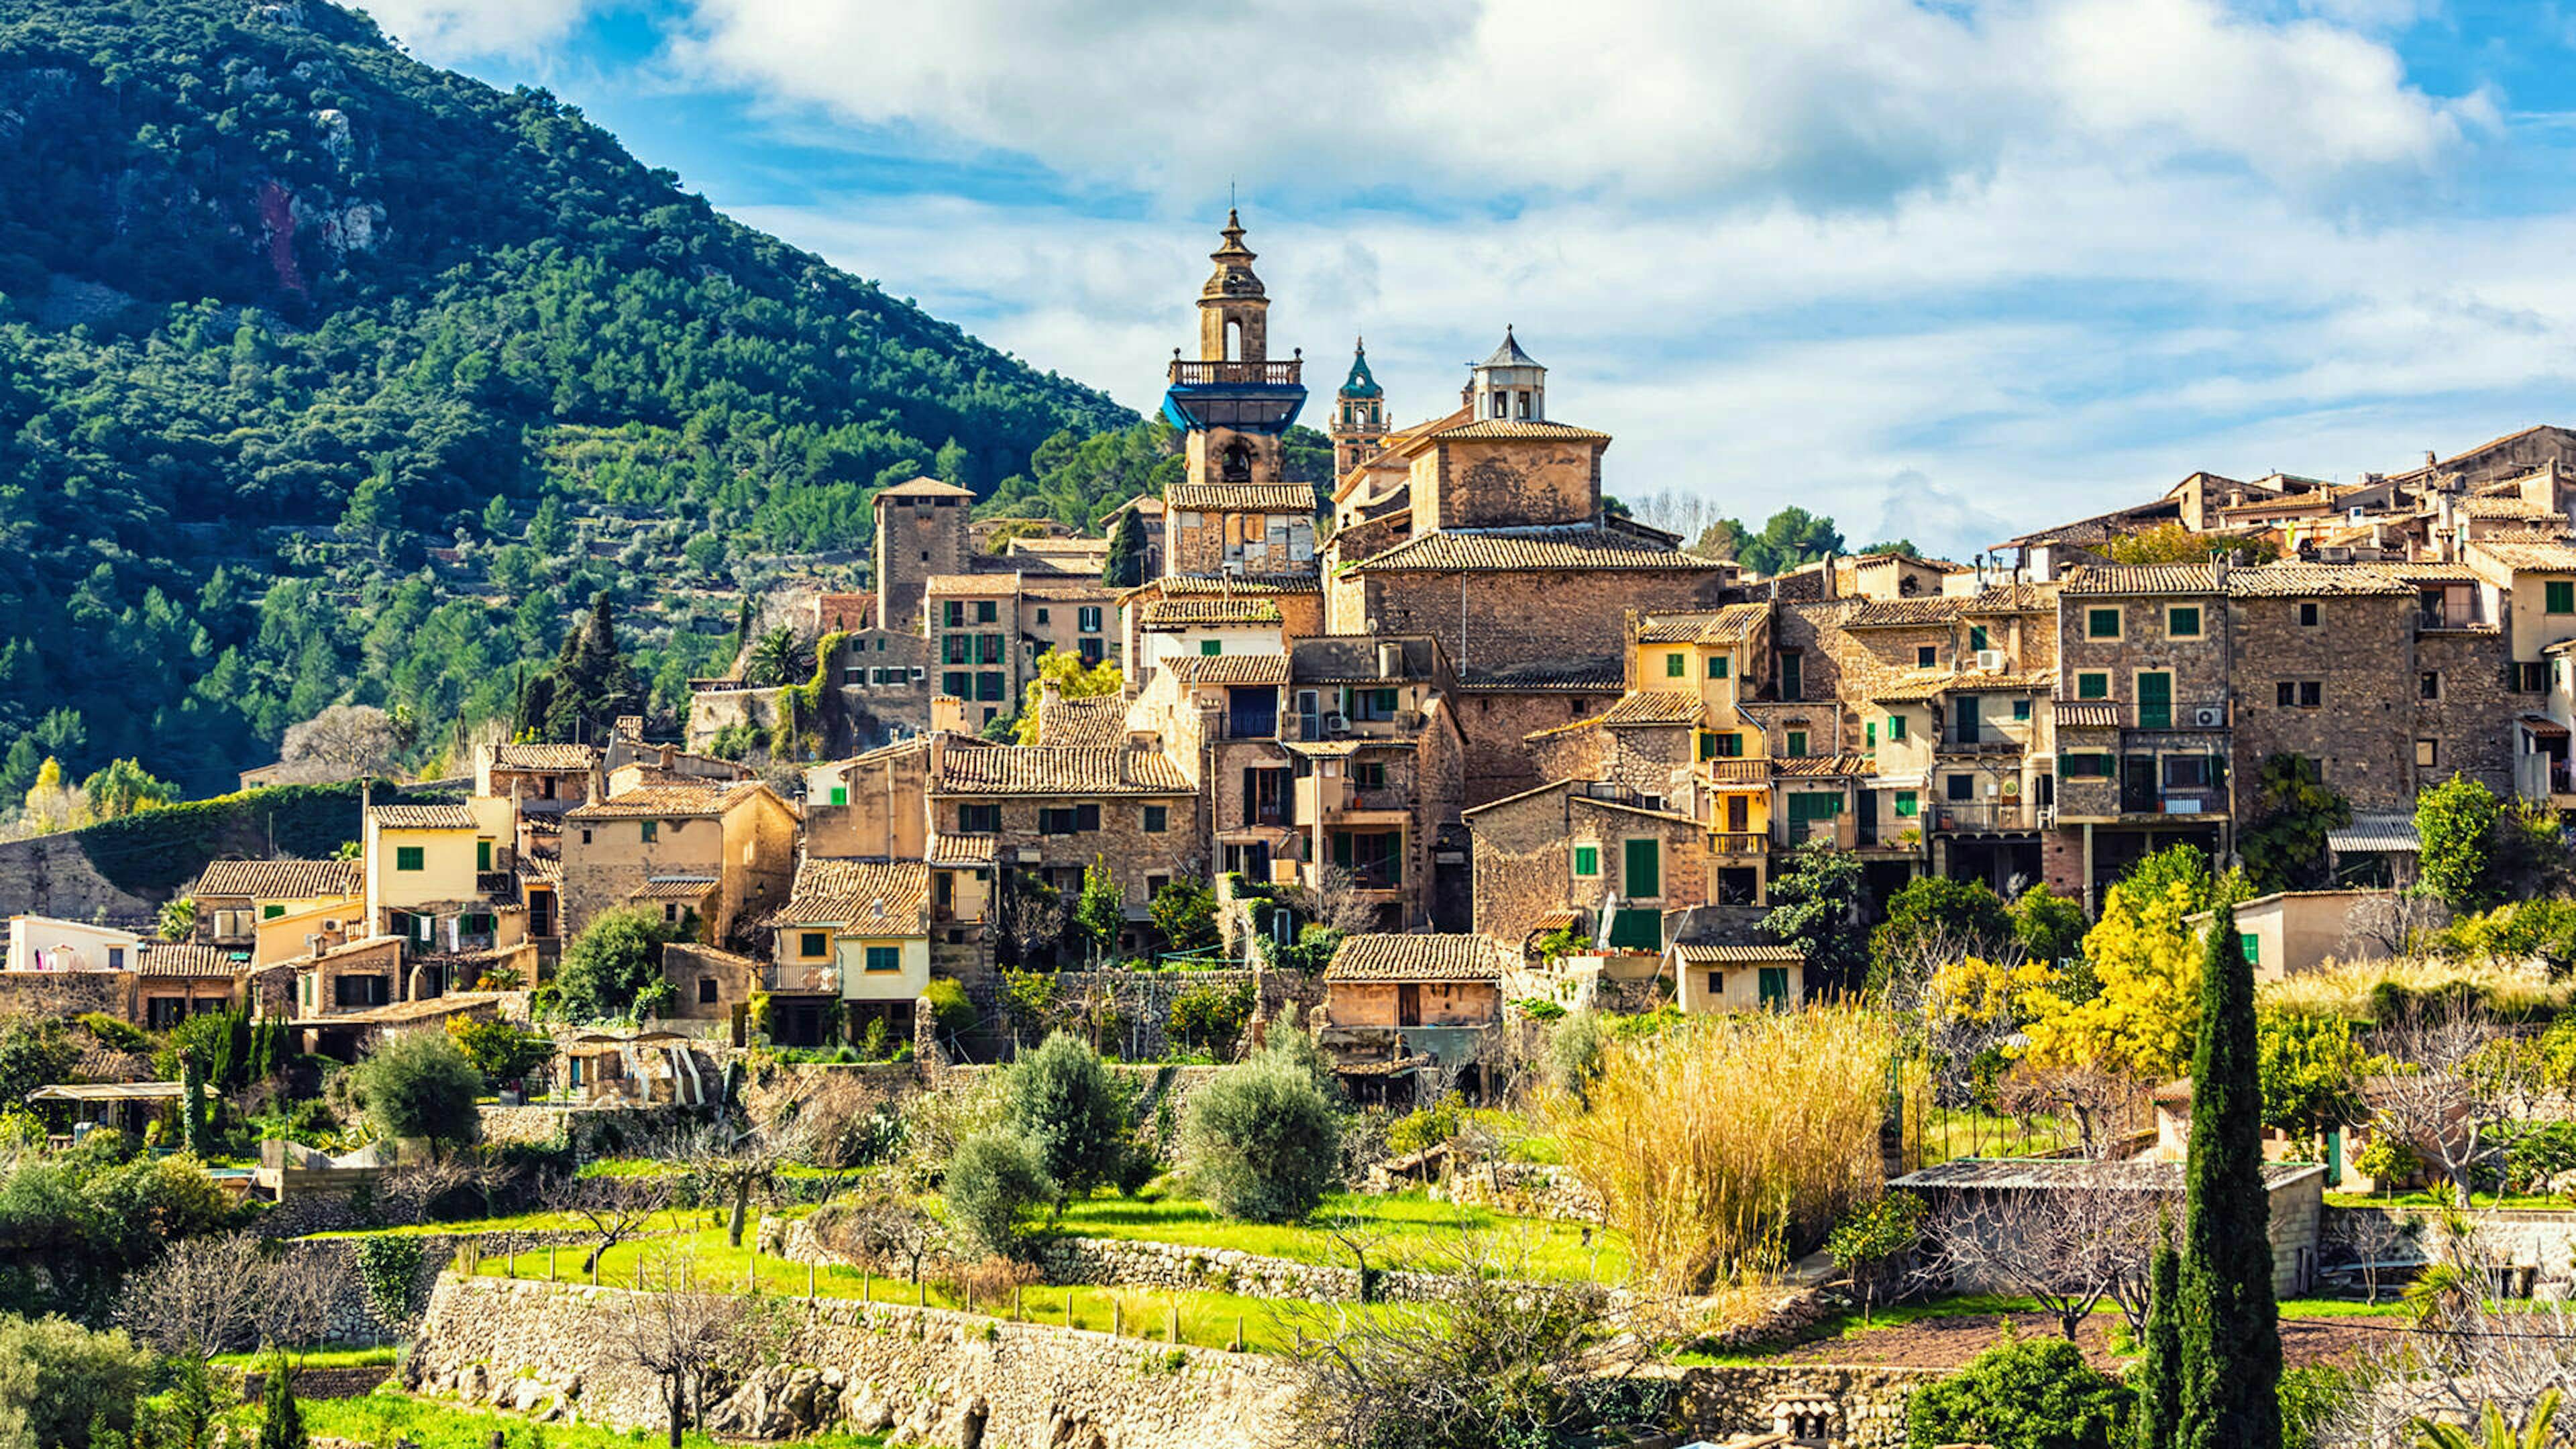 Discover the history & beauty of Valldemossa